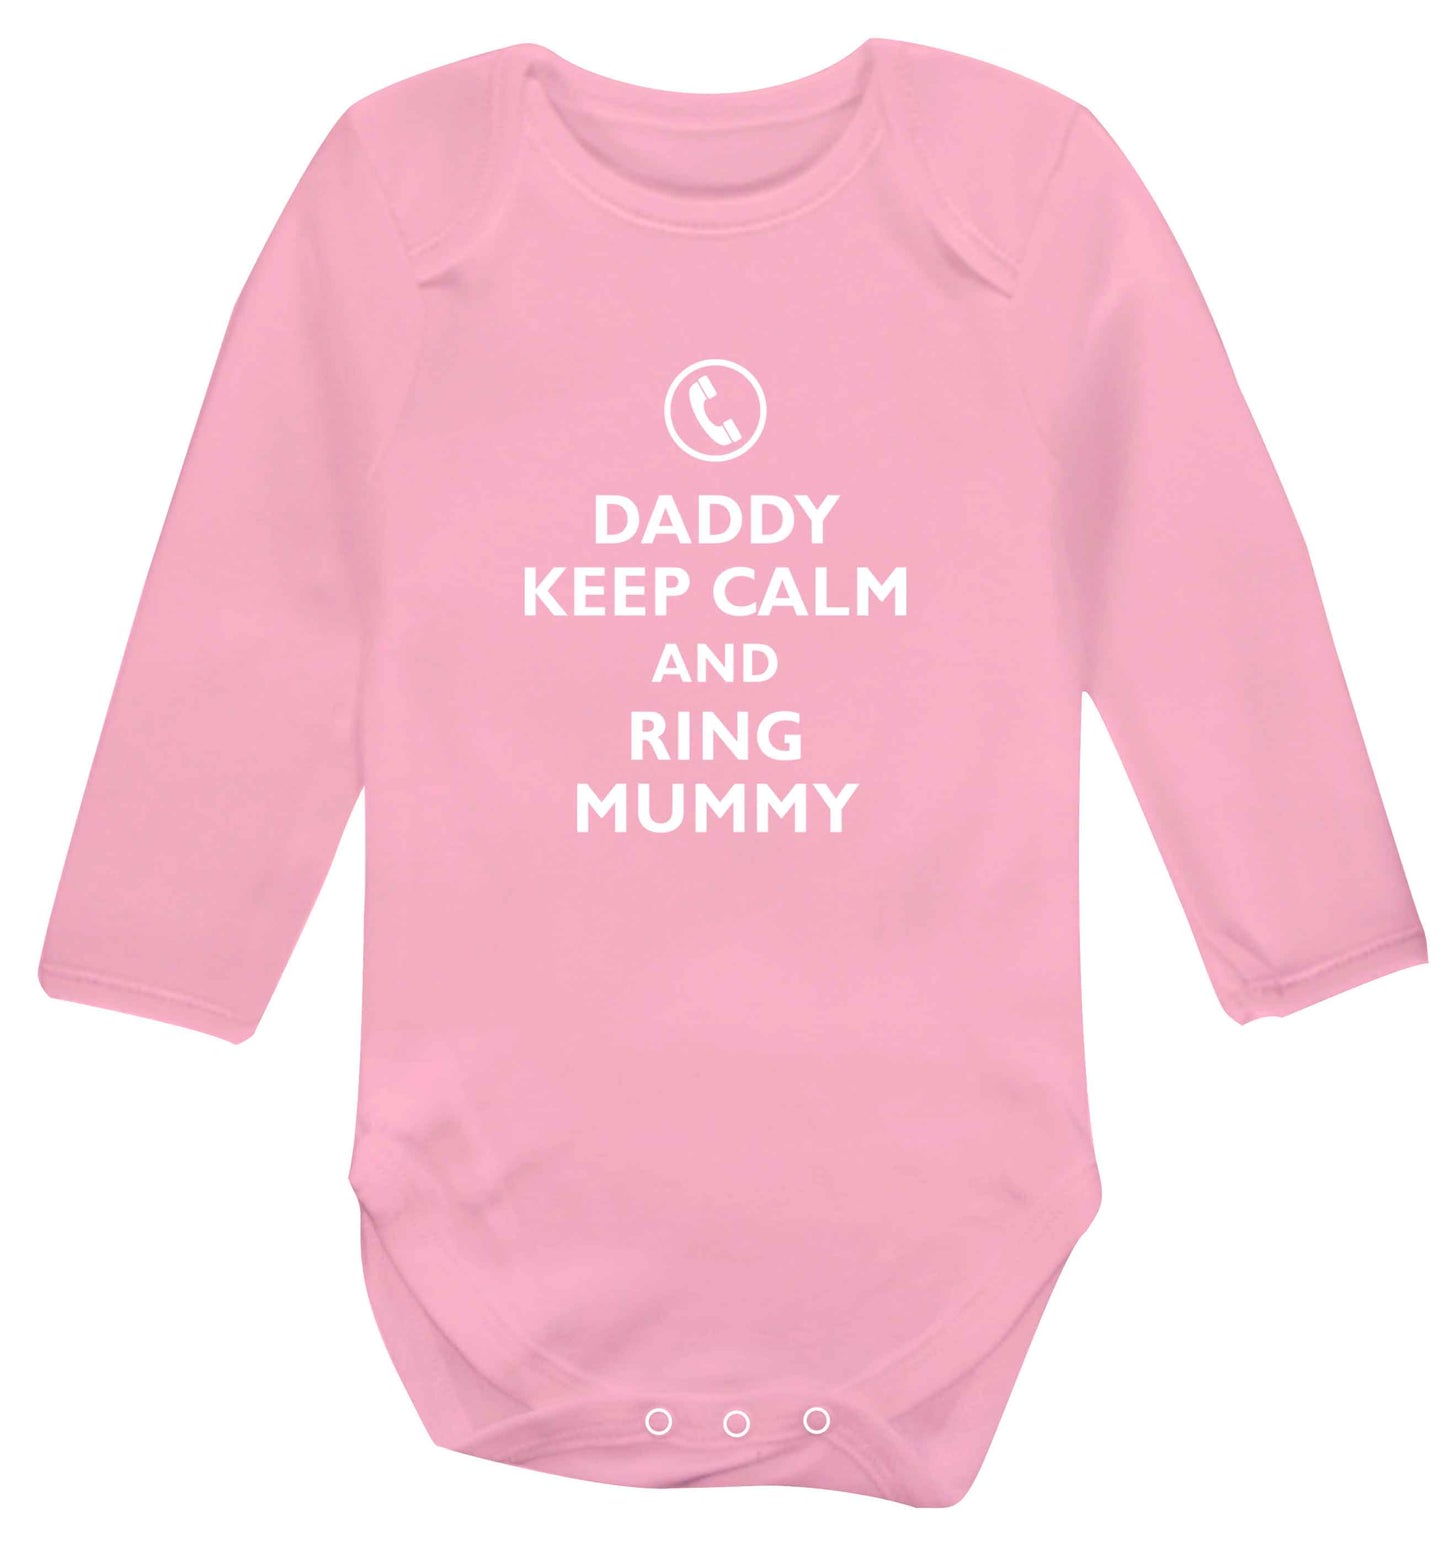 Daddy keep calm and ring mummy baby vest long sleeved pale pink 6-12 months